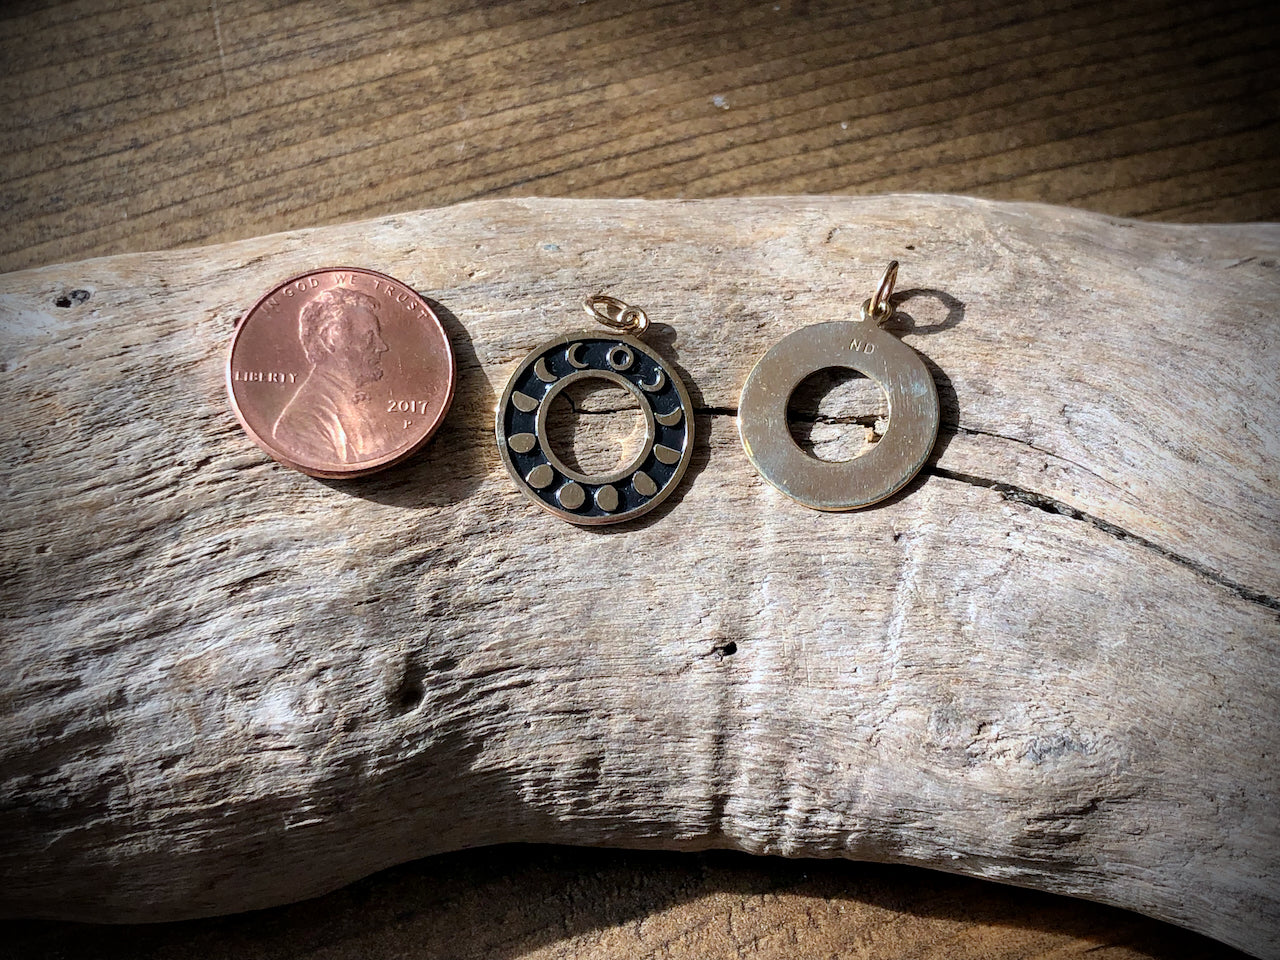 Phases of the Moon Circle Pendant - Bronze